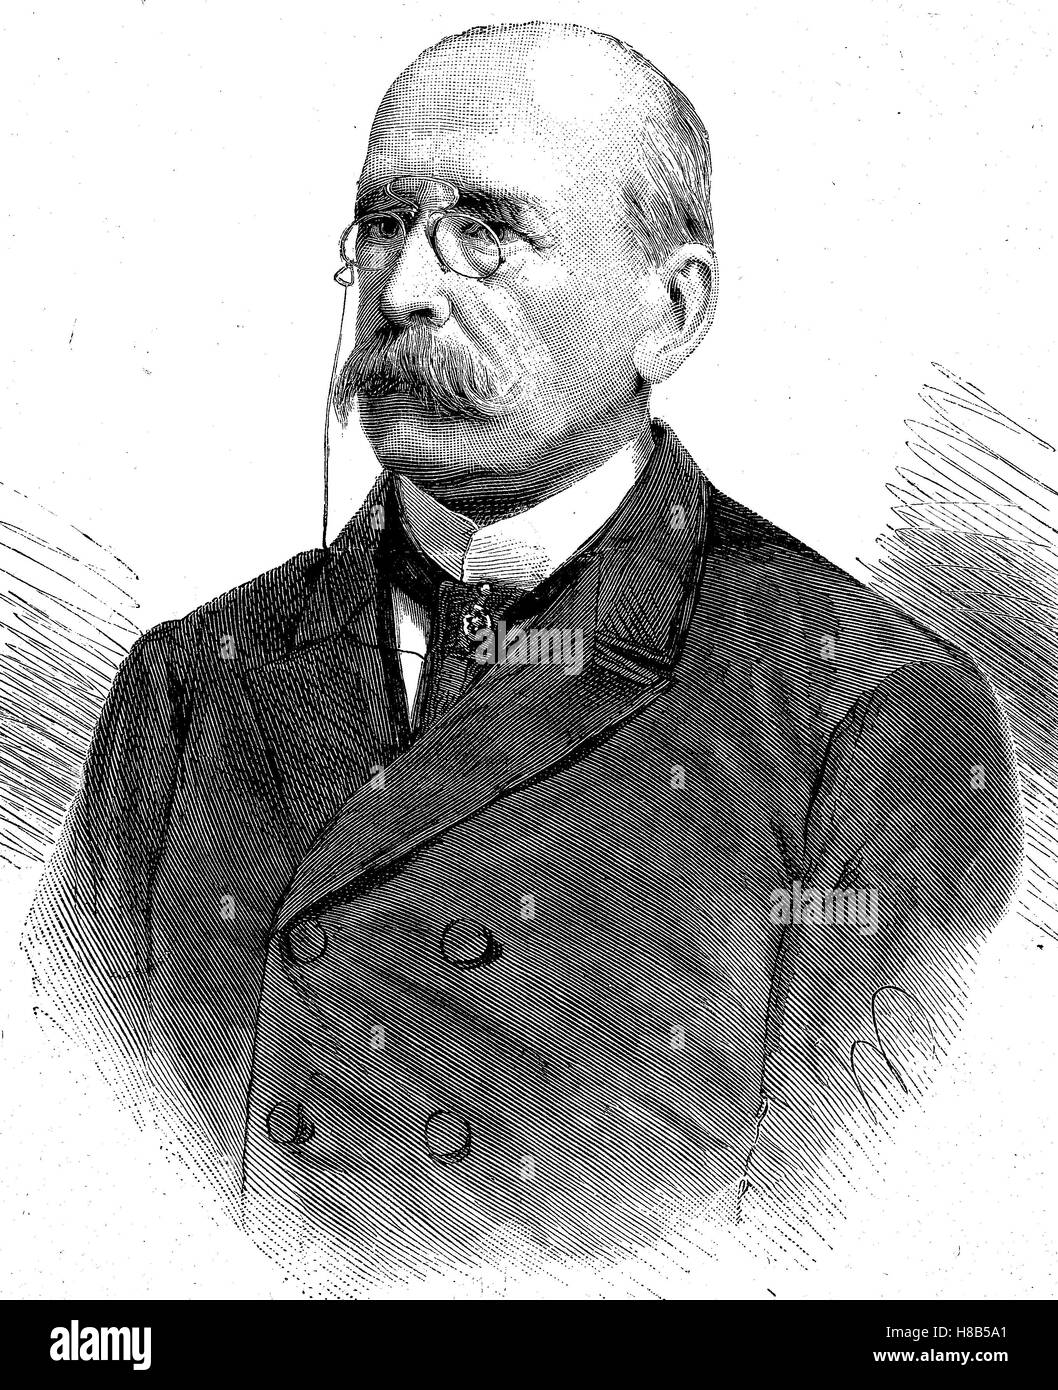 Karl Hermann Peter Thielen, January 30, 1832 - January 10, 1906 in Berlin, a Prussian politician and was minister for public works, Woodcut from 1892 Stock Photo